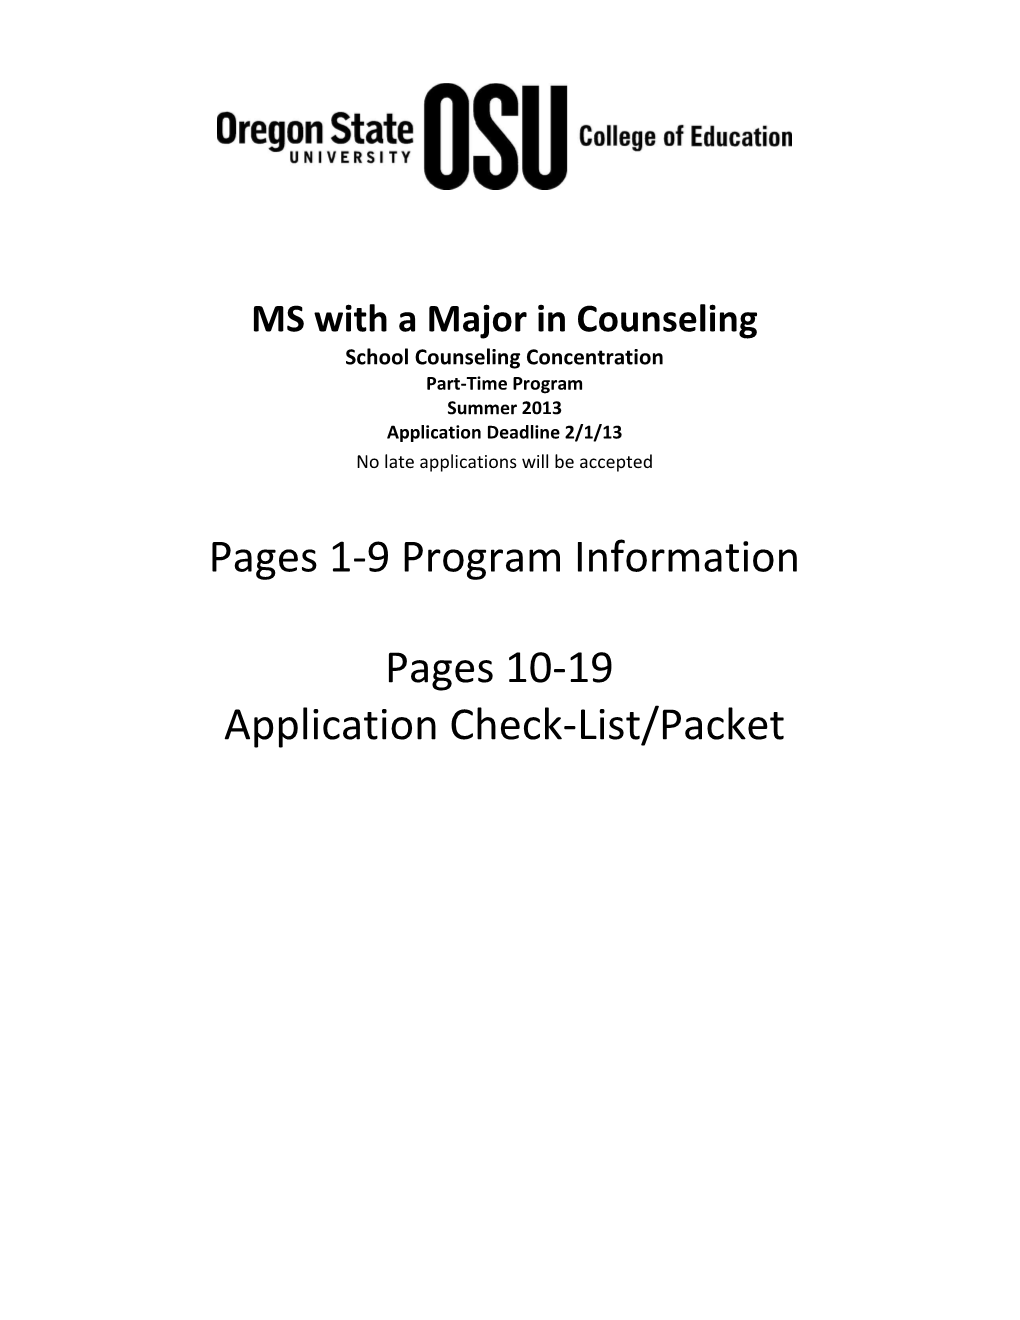 MS with a Major in Counseling